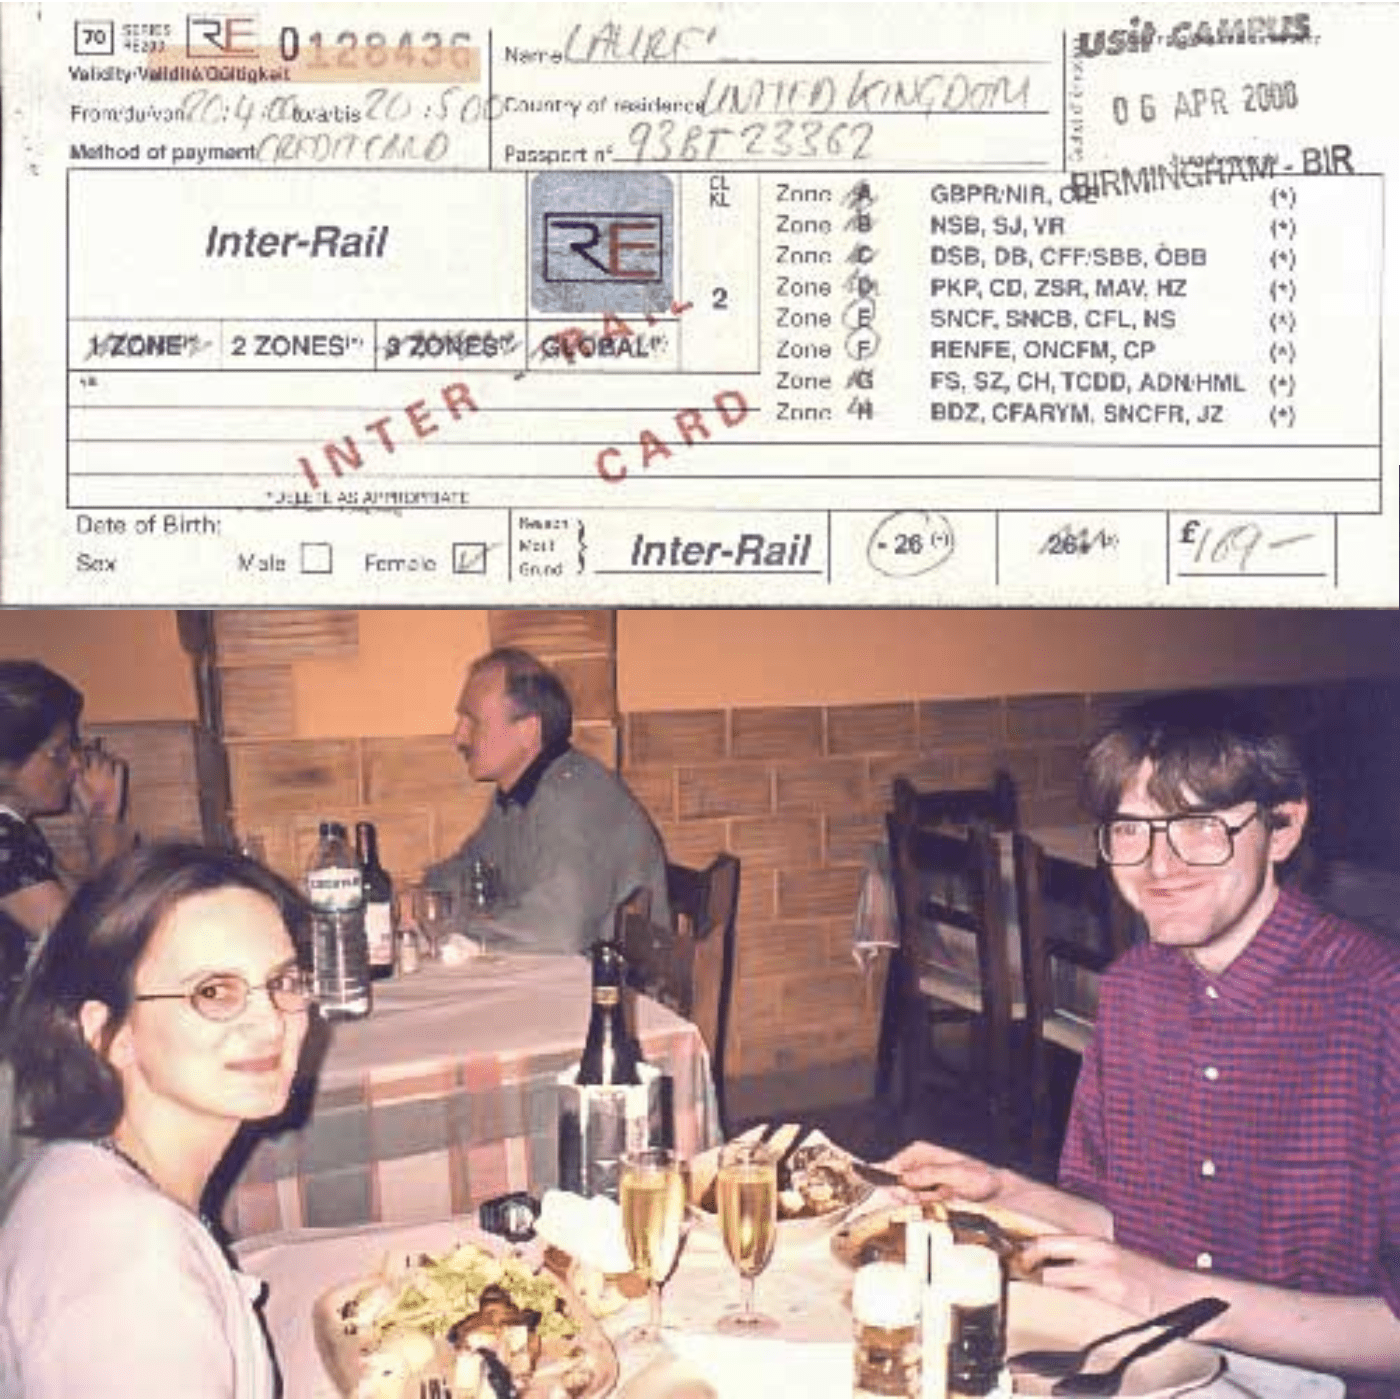 A dual-image. At the top is a photo of an Inter-Rail ticket, from the year 2000, written out on a typed bit of flimsy paper. At the bottom is a picture of two people in a restaurant, with a table of food and wine between them.